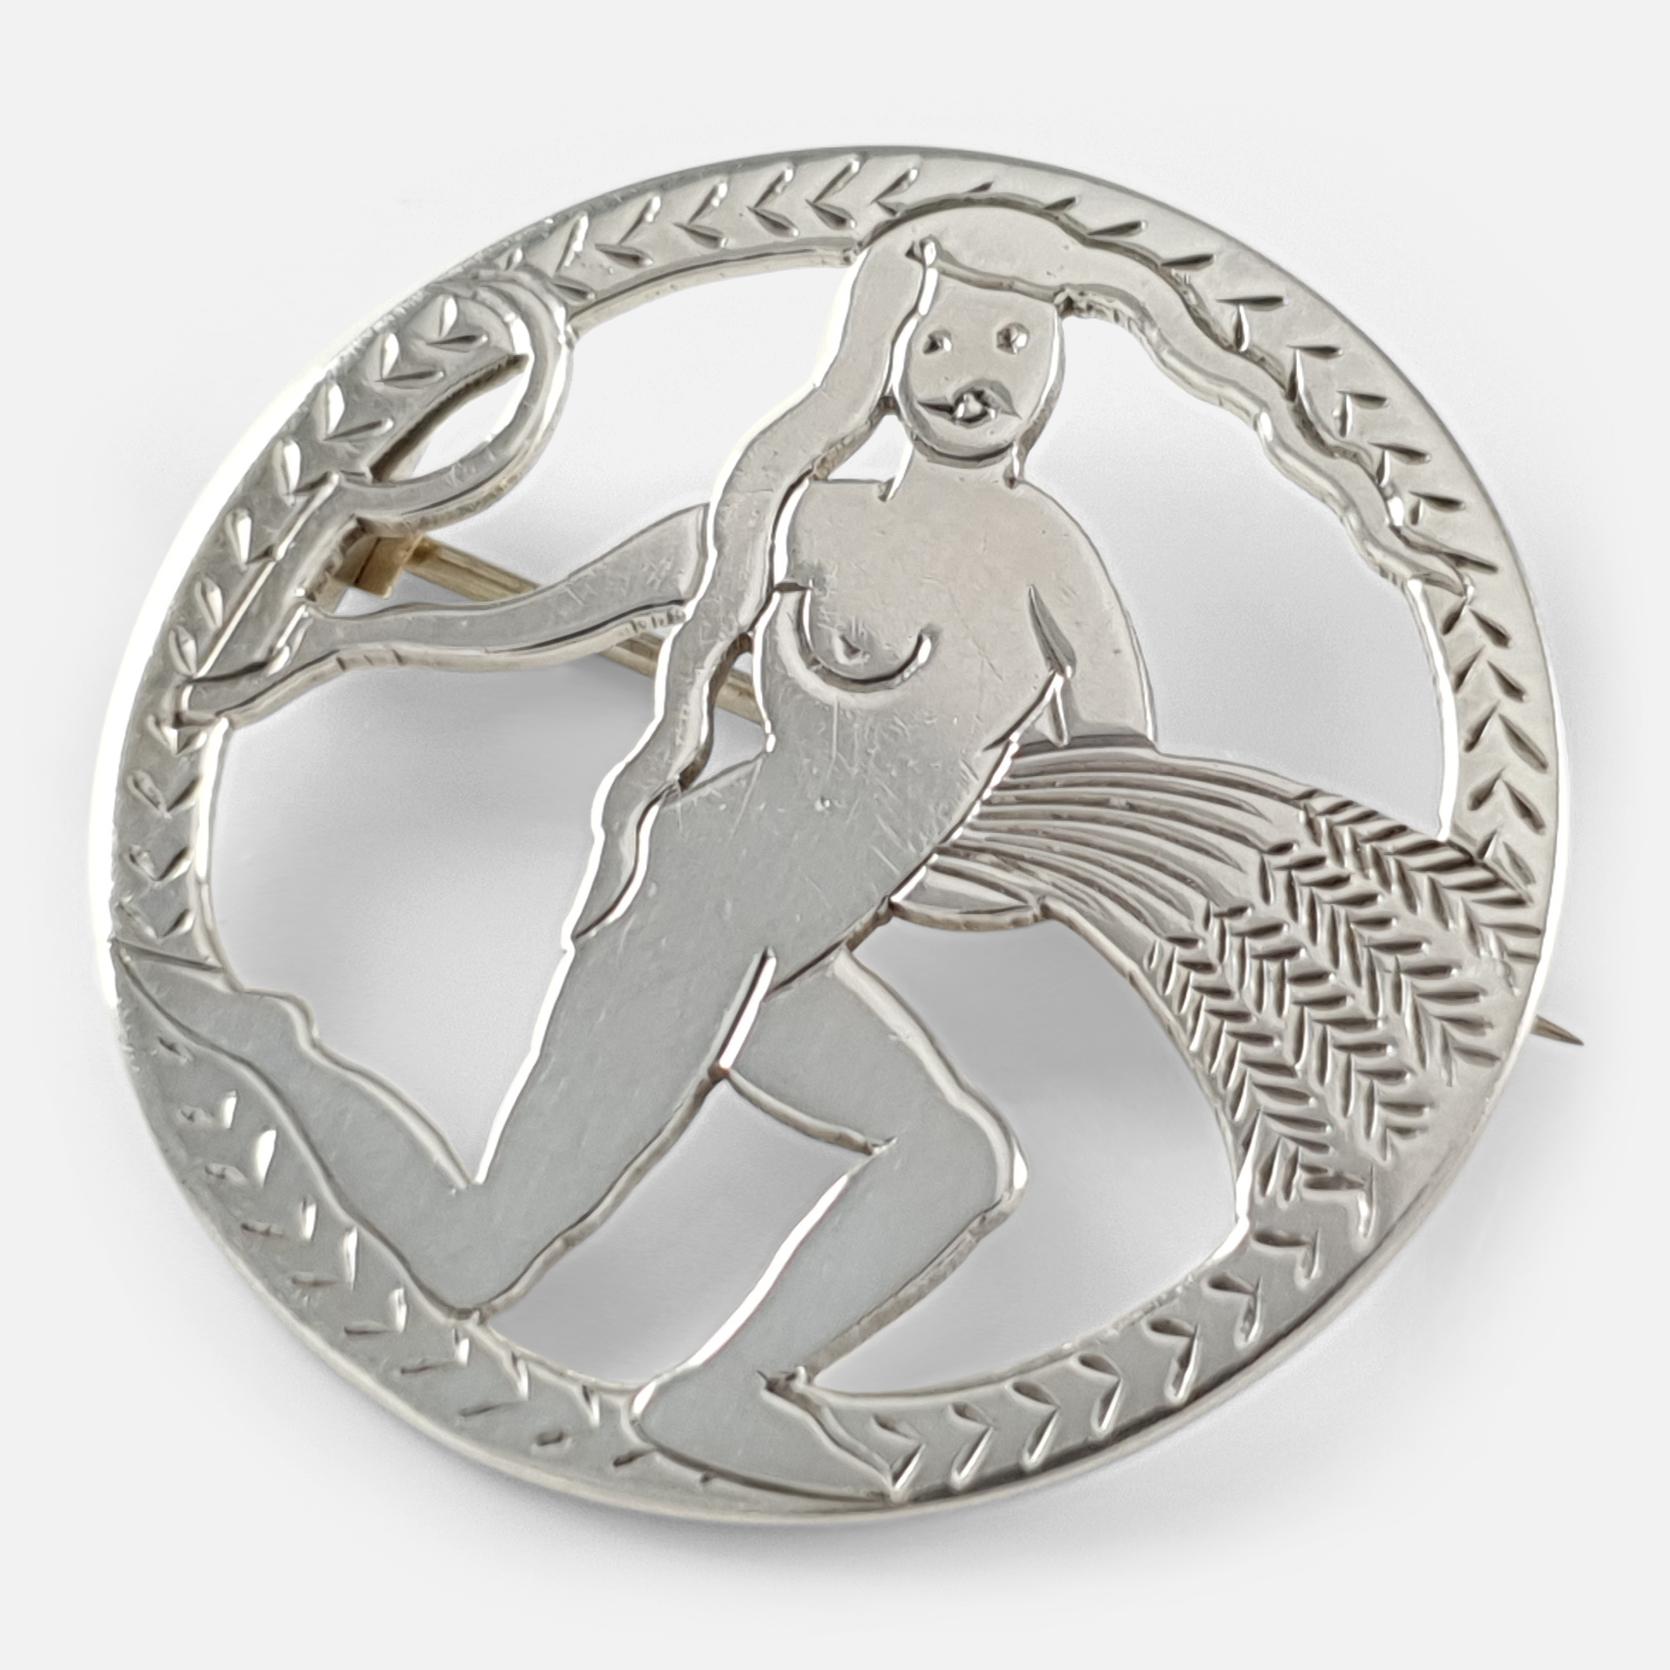 An Art Deco sterling silver brooch in the form of Virgo by H.G. Murphy. The brooch is stamped with London hallmarks for 1933, the Falcon Studio's mark, and the maker's mark HGM. 

Engraving: - None.

Measurement: - The brooch measures approximately